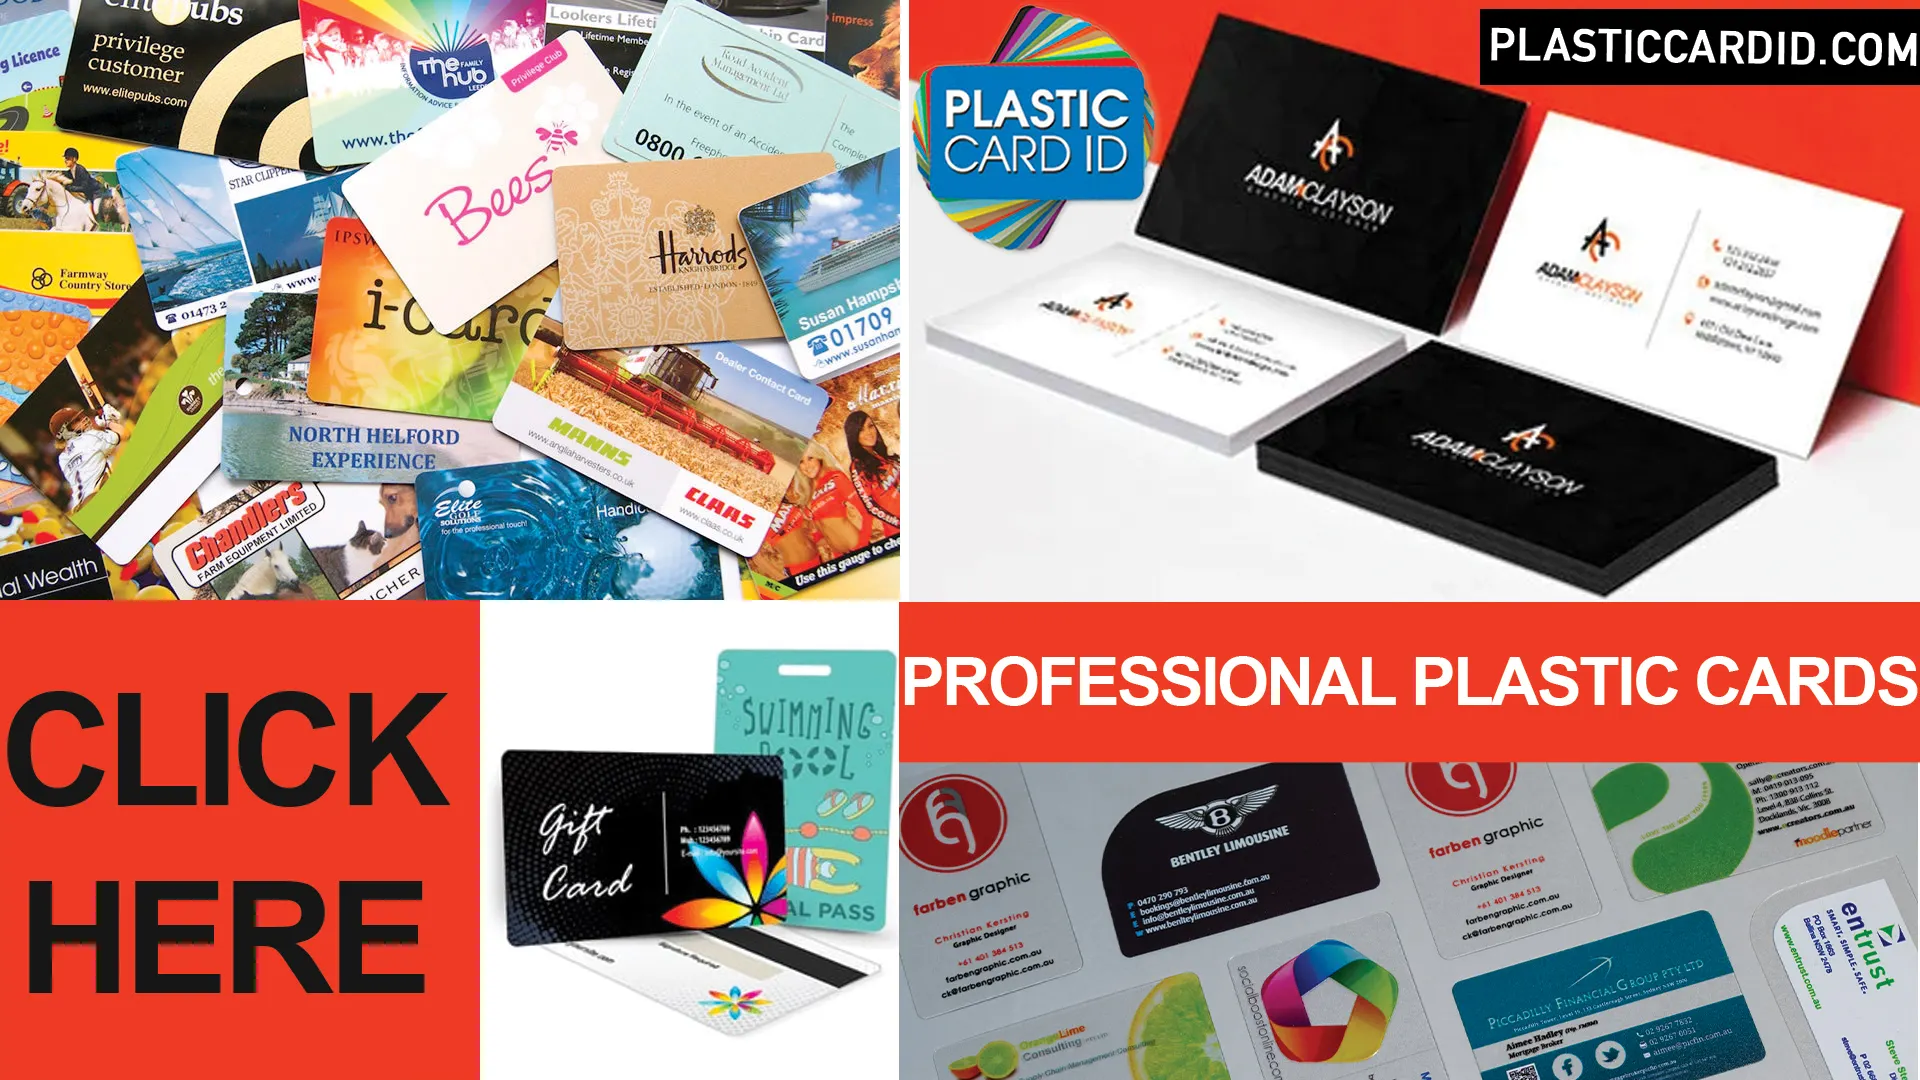 Plastic Card Printers and Refill Supplies